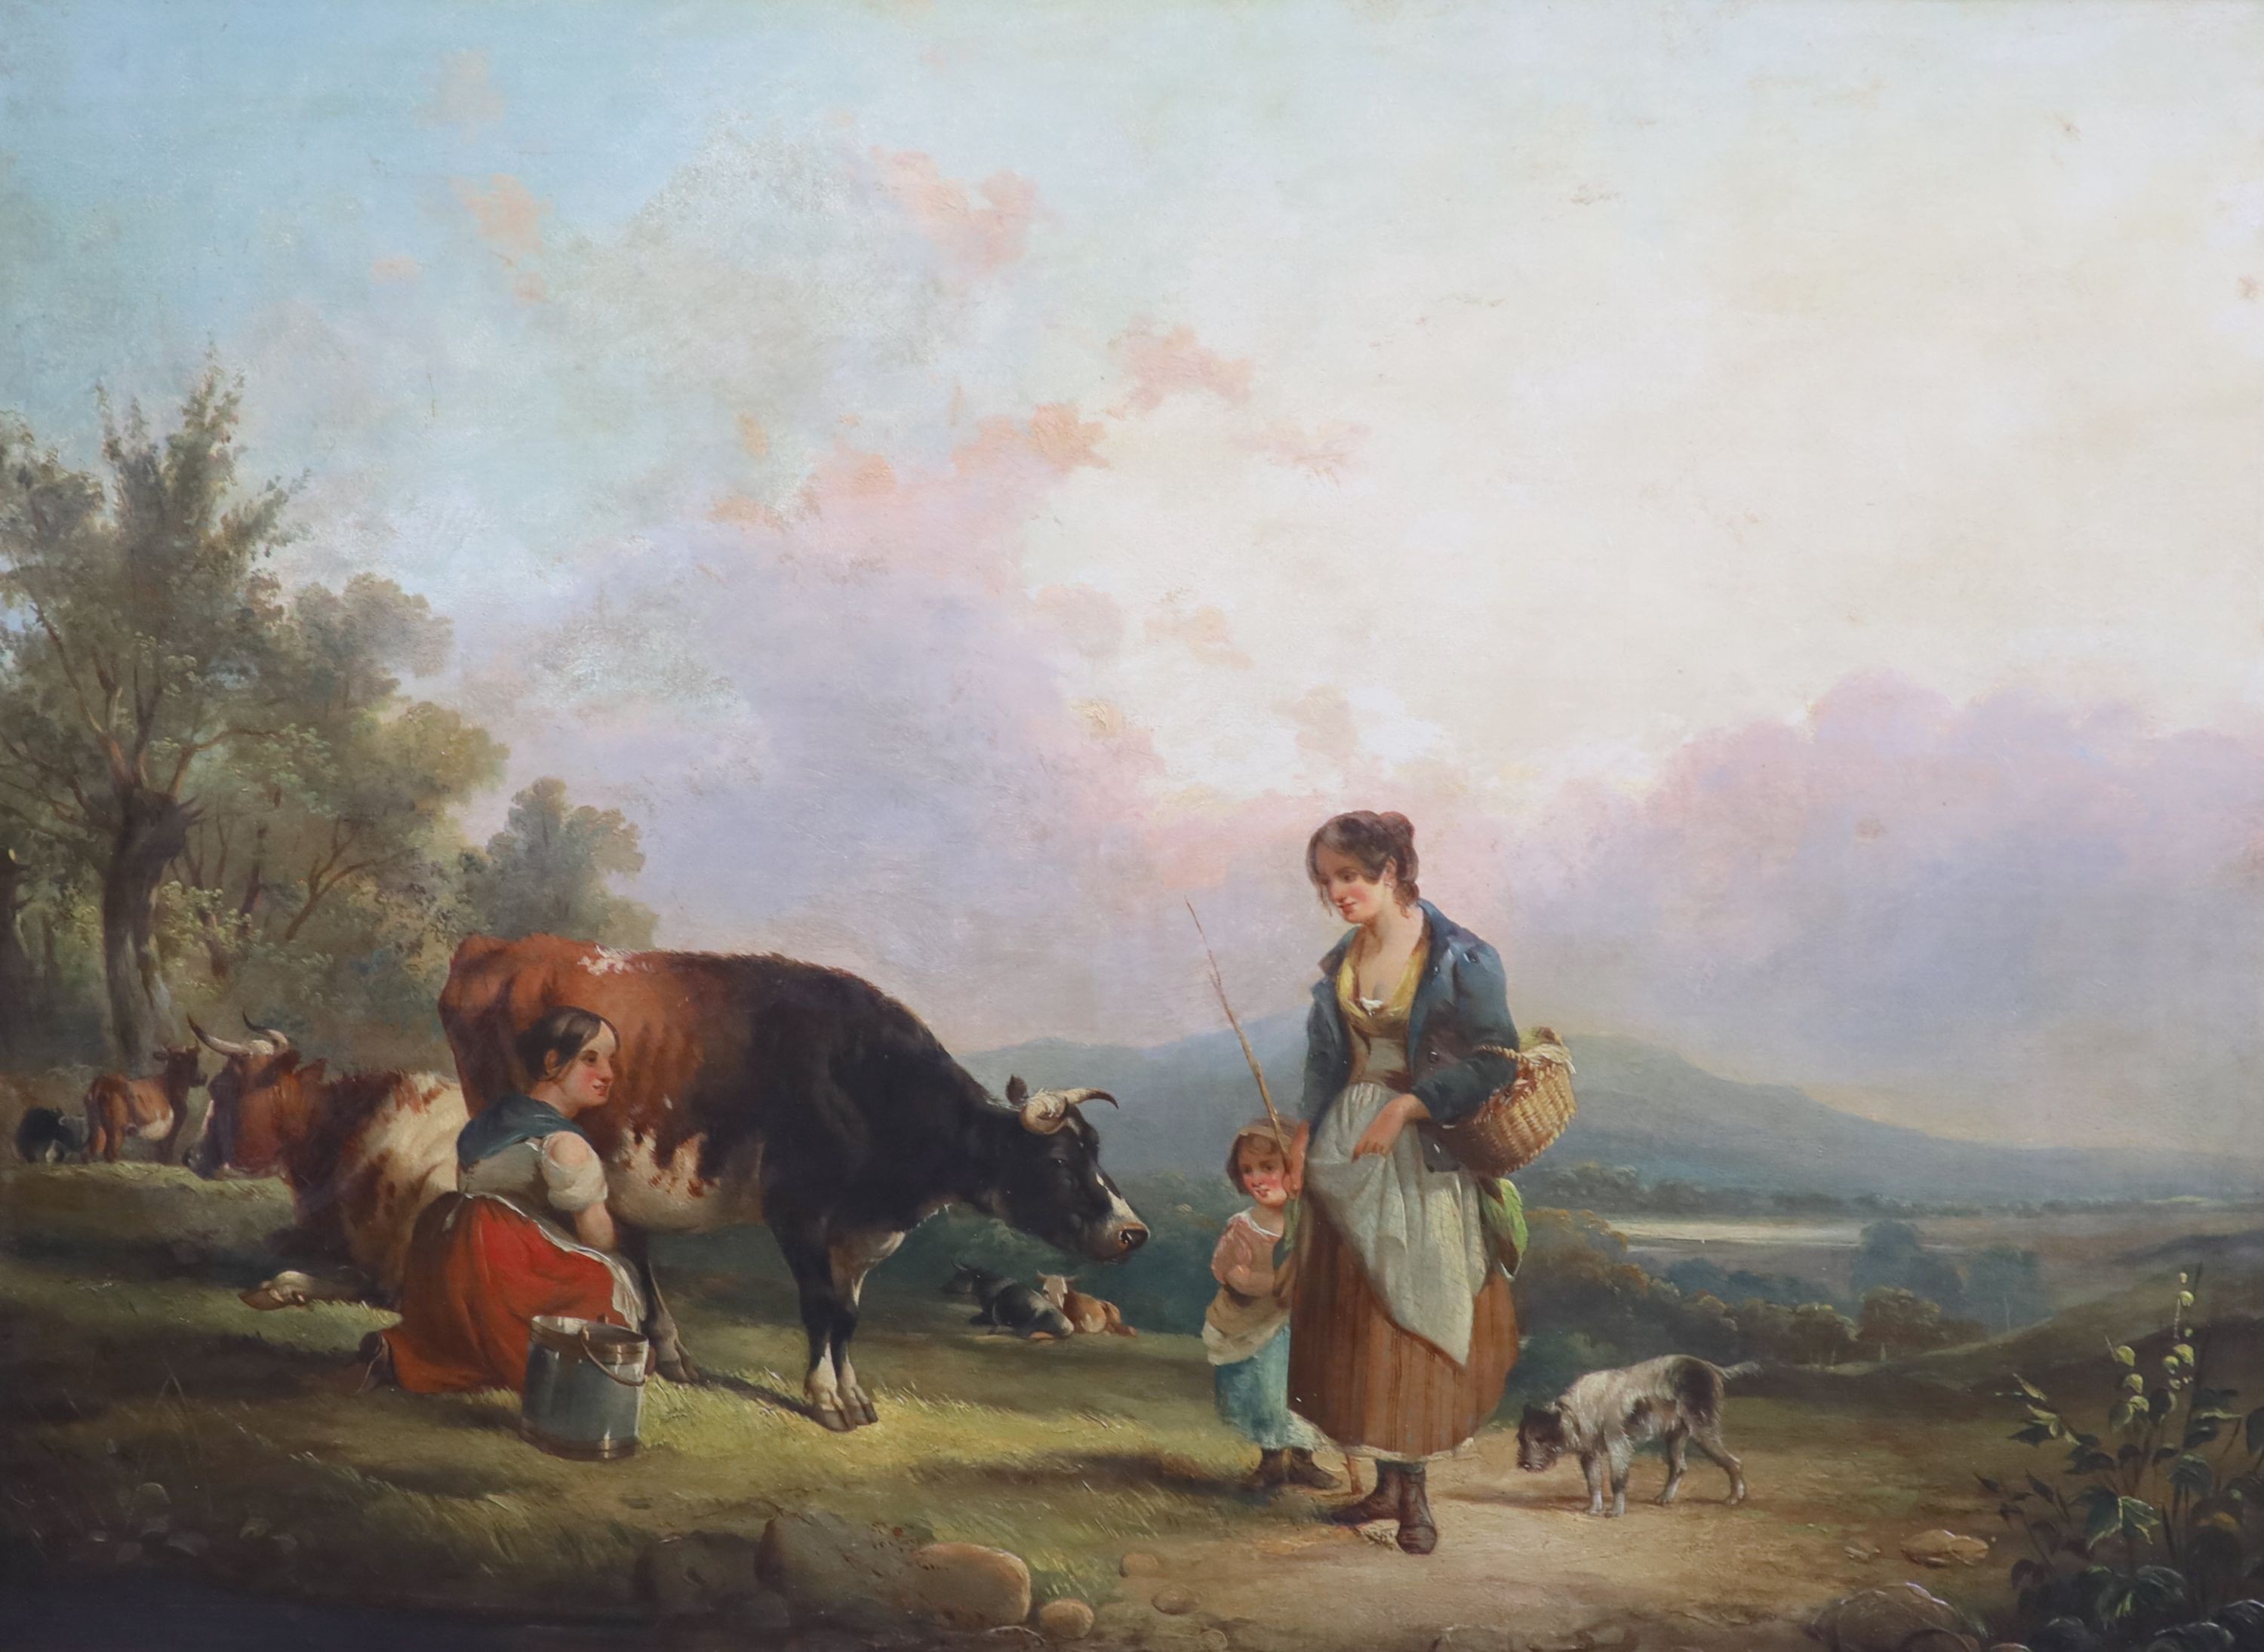 William Shayer Snr (1787-1879), Country folk on a path with a milkmaid and cow, Oil on canvas, 55 x 75cm.